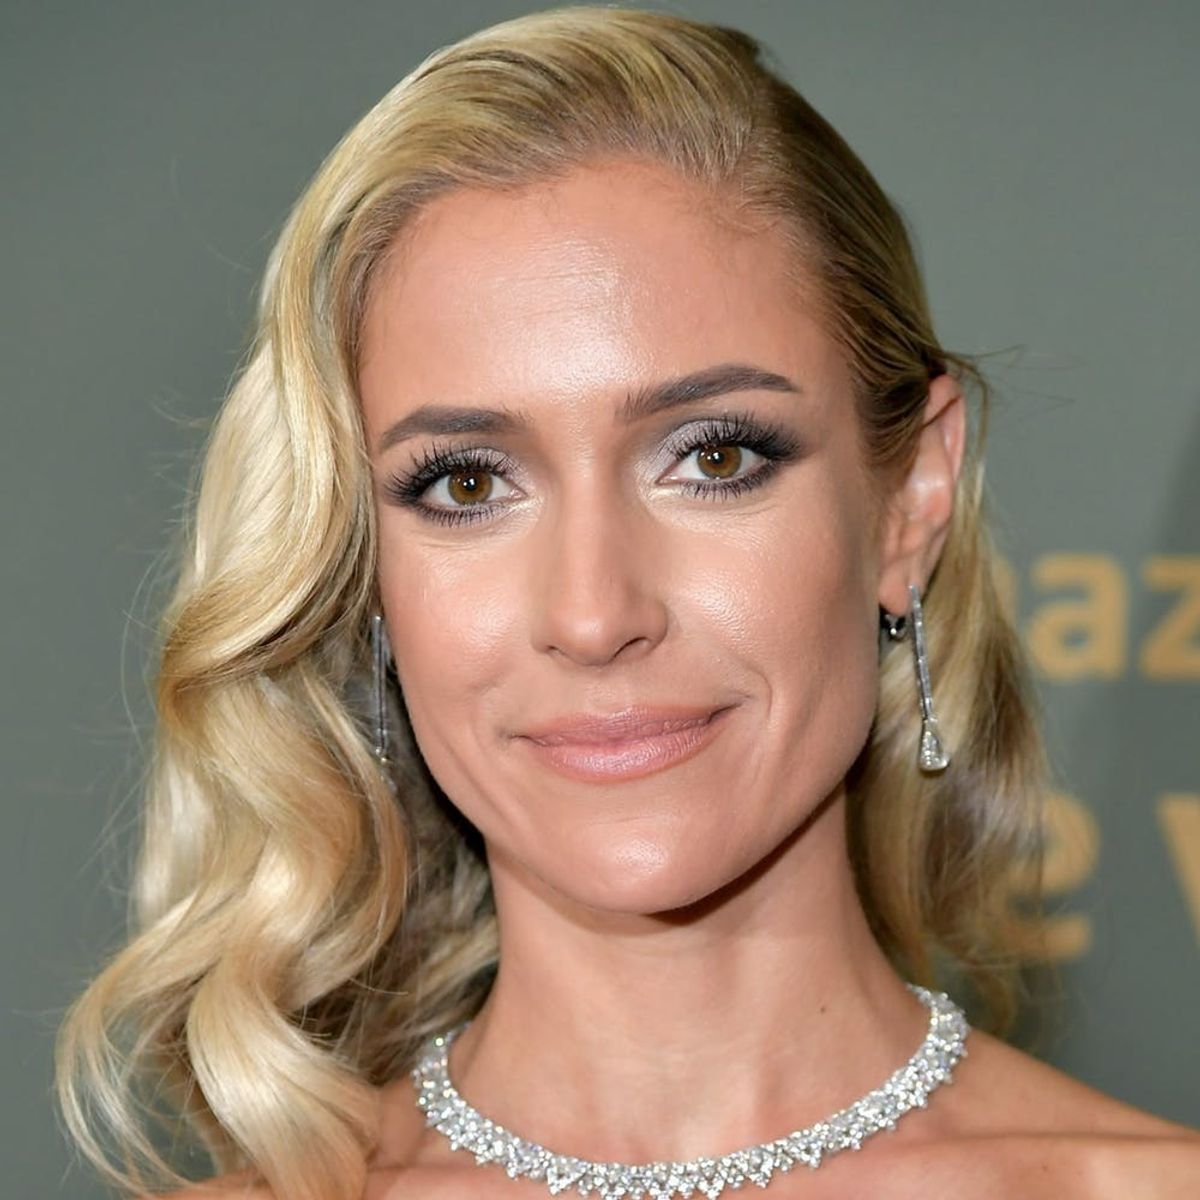 Kristin Cavallari Says She Would Love to Appear on ‘The Hills’ Reboot